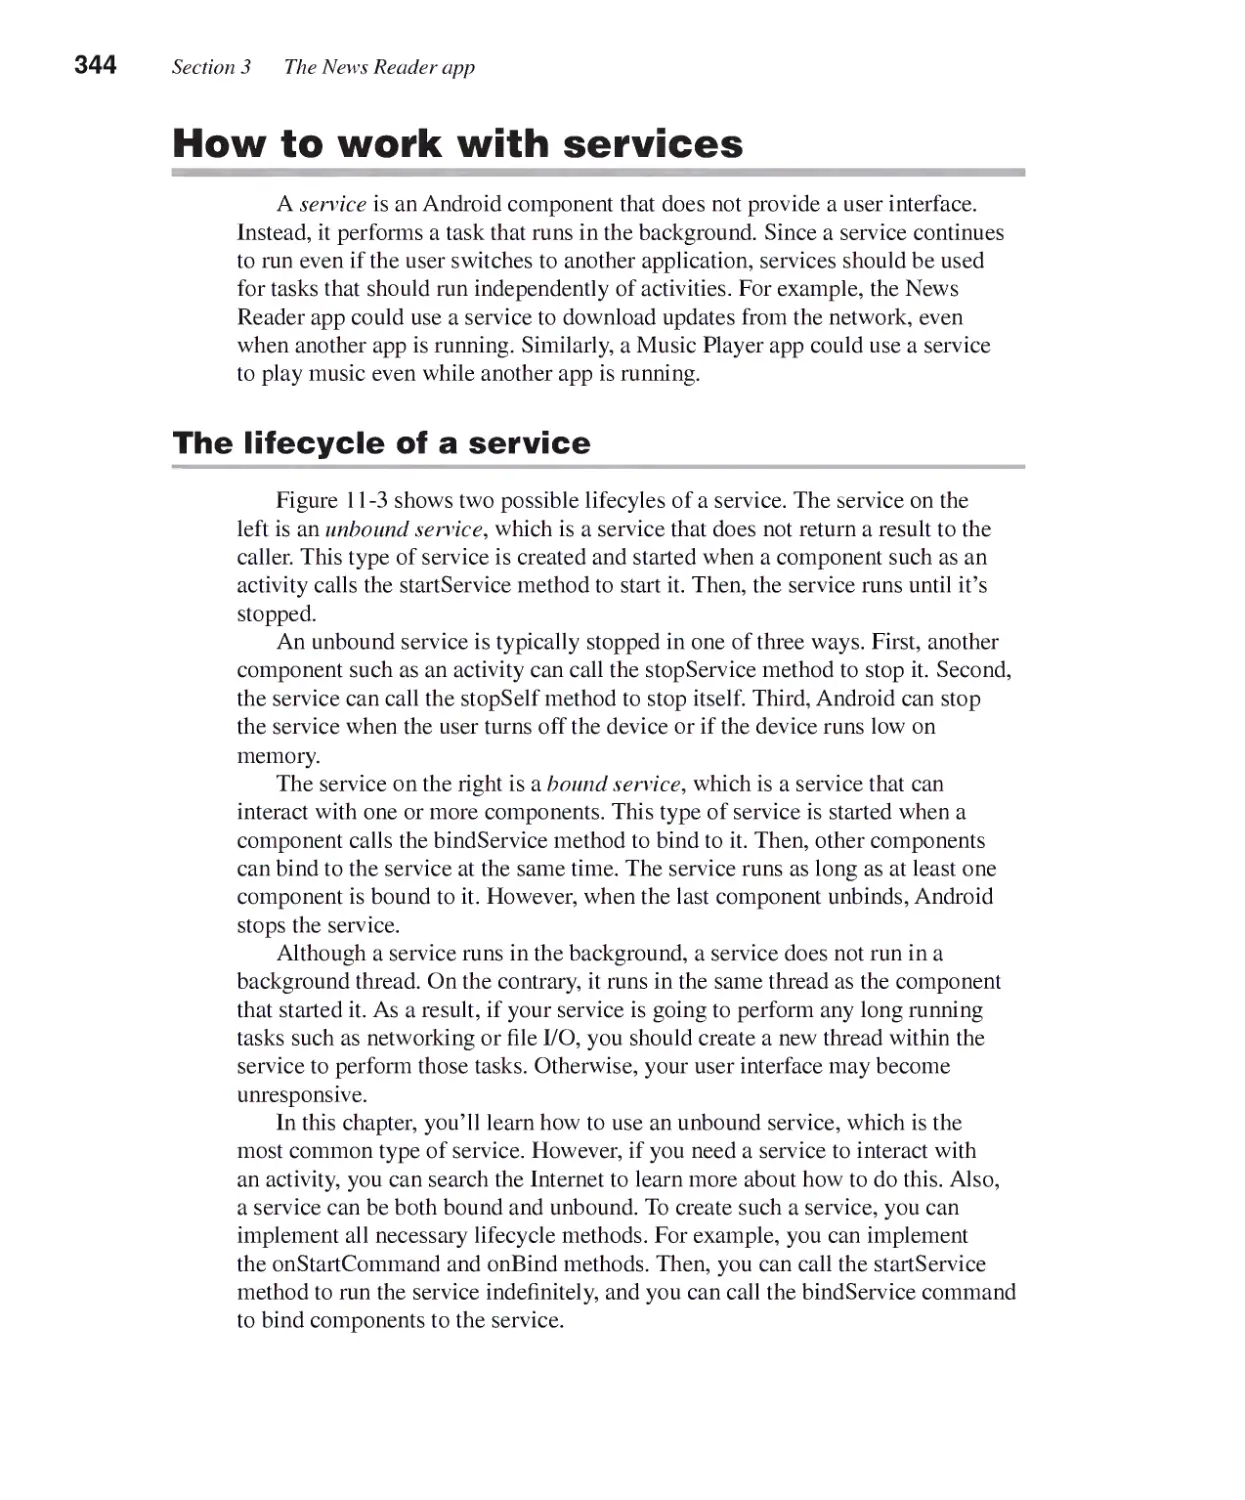 How to Work with Services